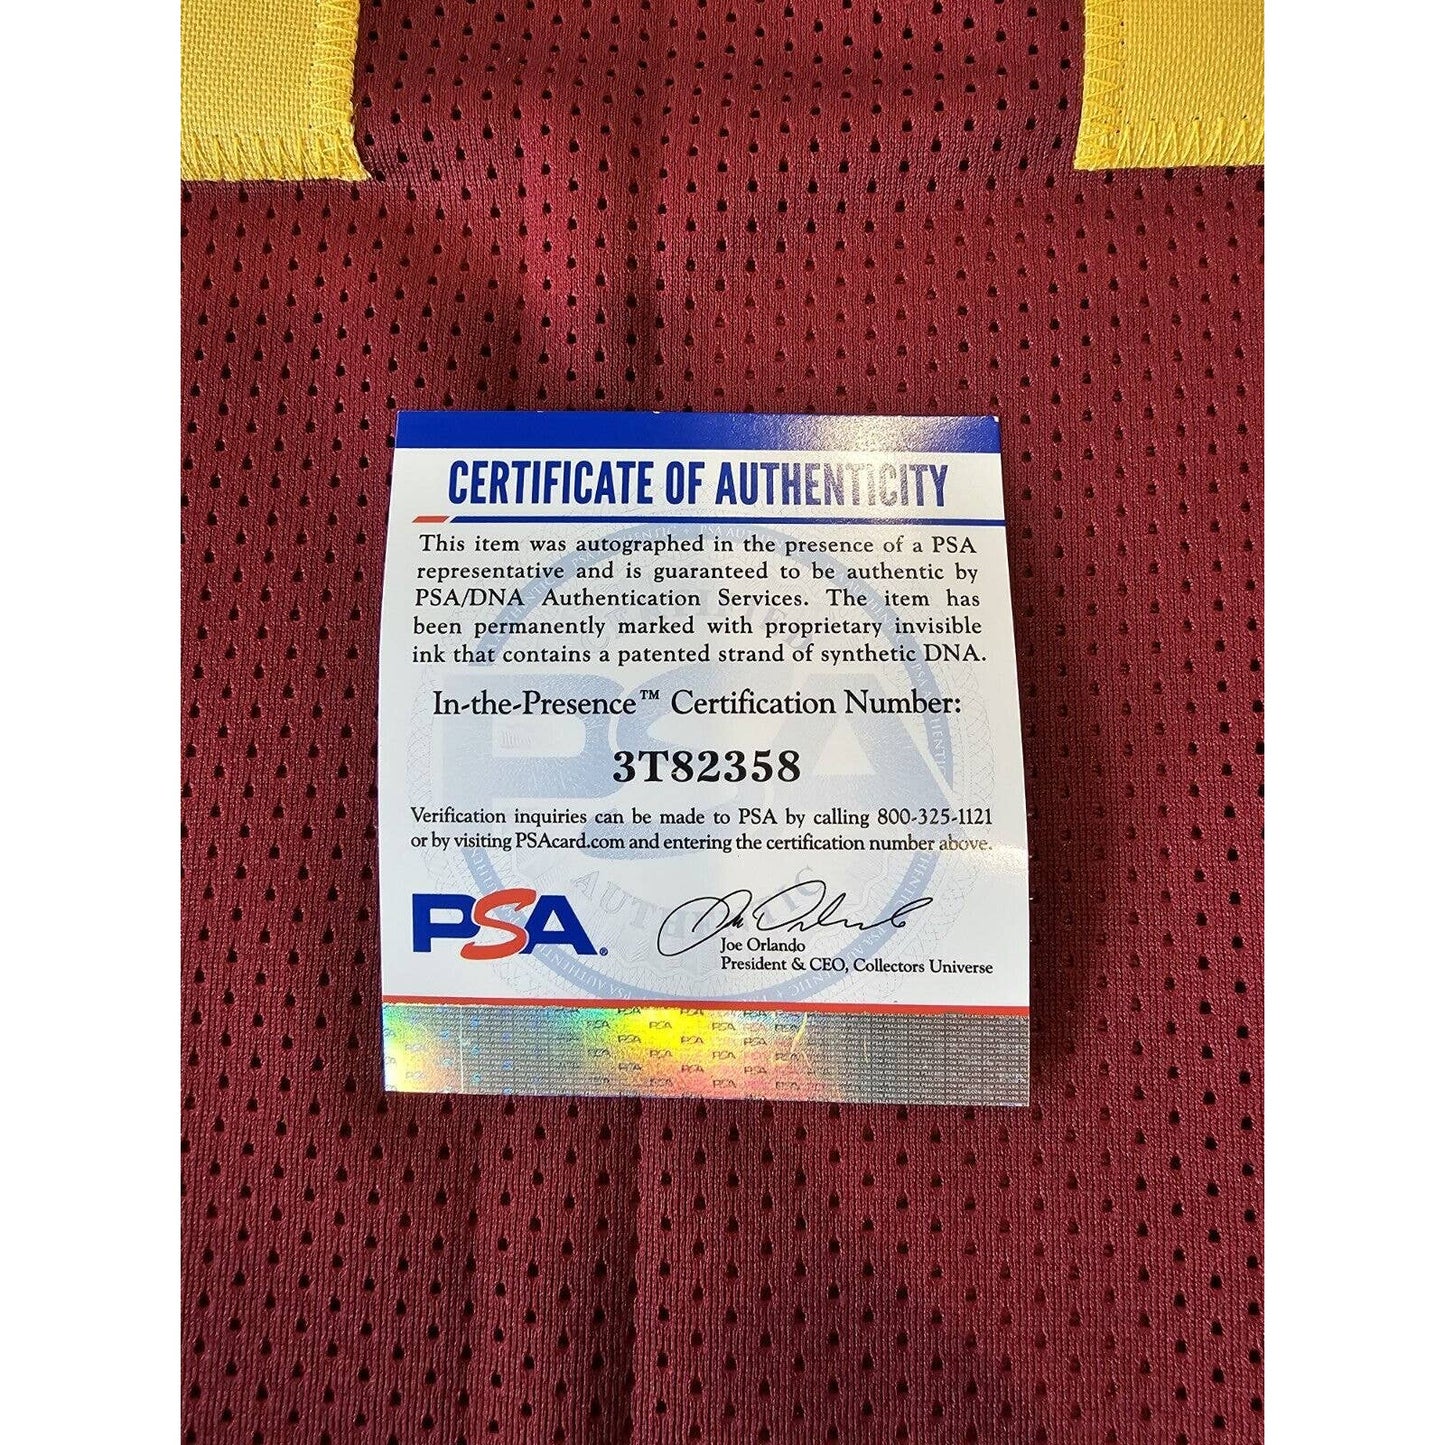 Ron Yary Autographed/Signed Jersey PSA/DNA COA USC Trojans